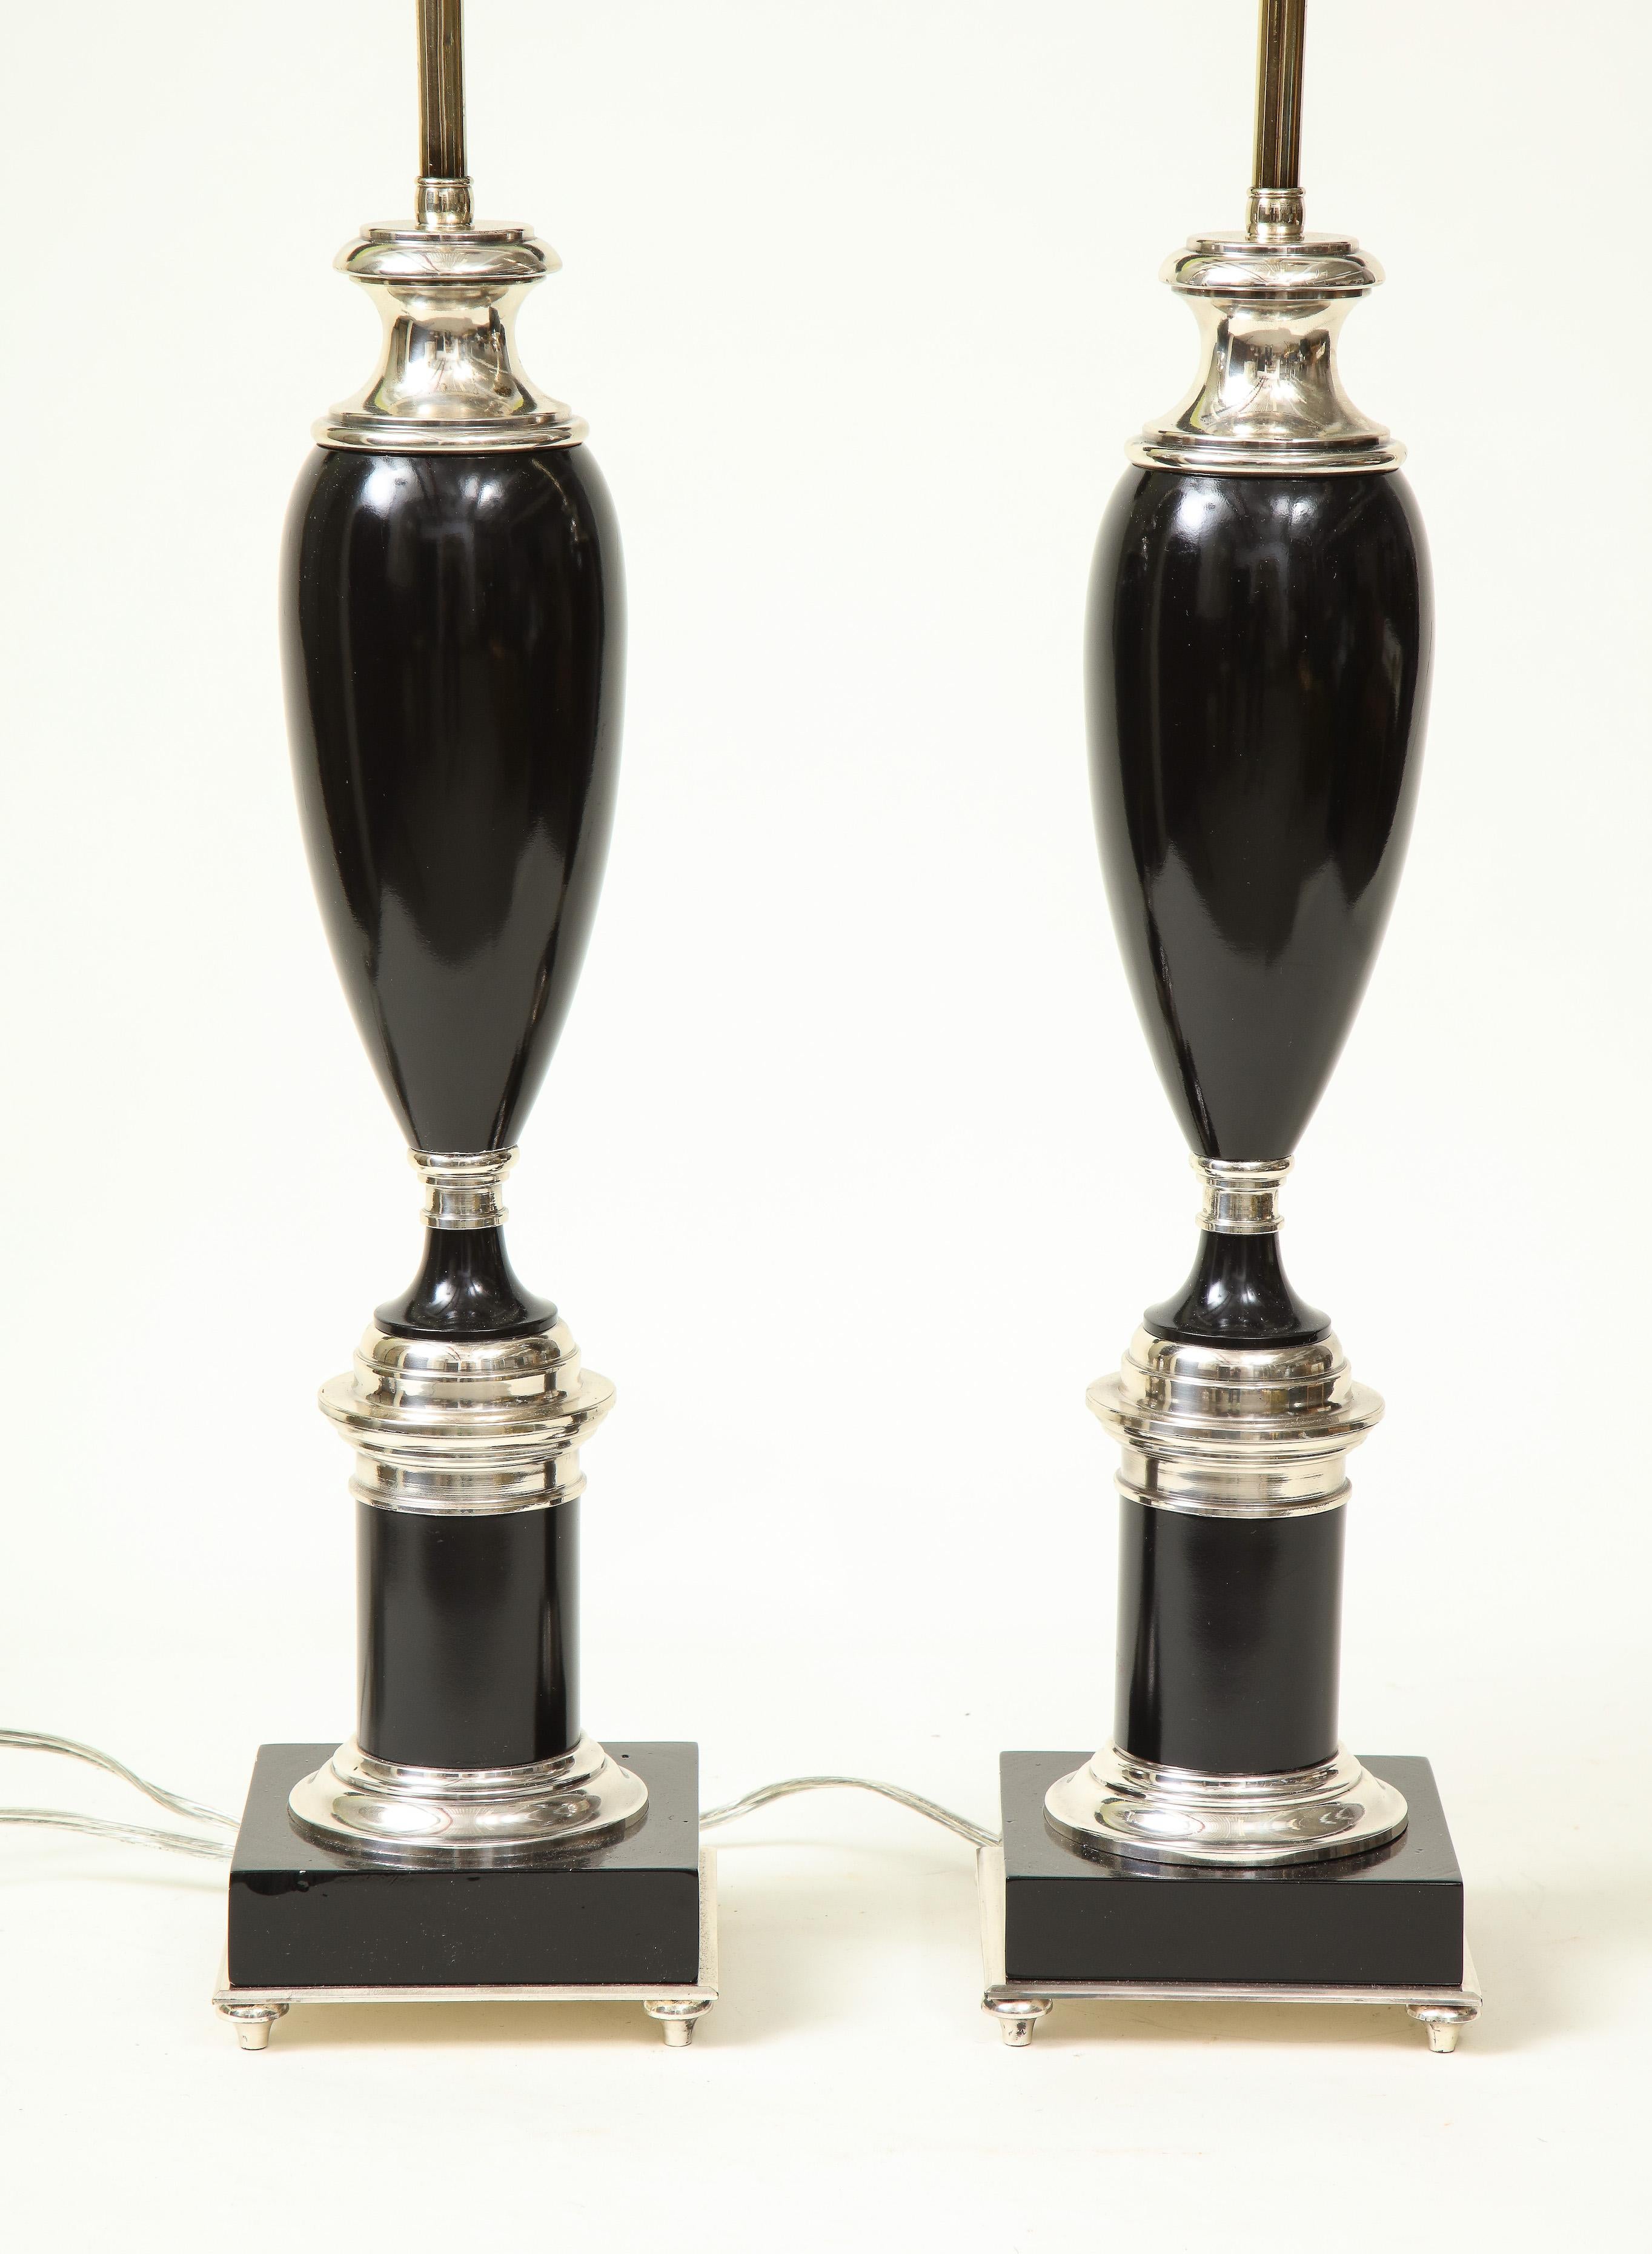 High style with each in the form of a black elongated footed urn on a plinth base, mounted with chrome details; fitted with two bulb sockets and adjustable rod.

Provenance: From the Collection of Mario Buatta, New York, NY.